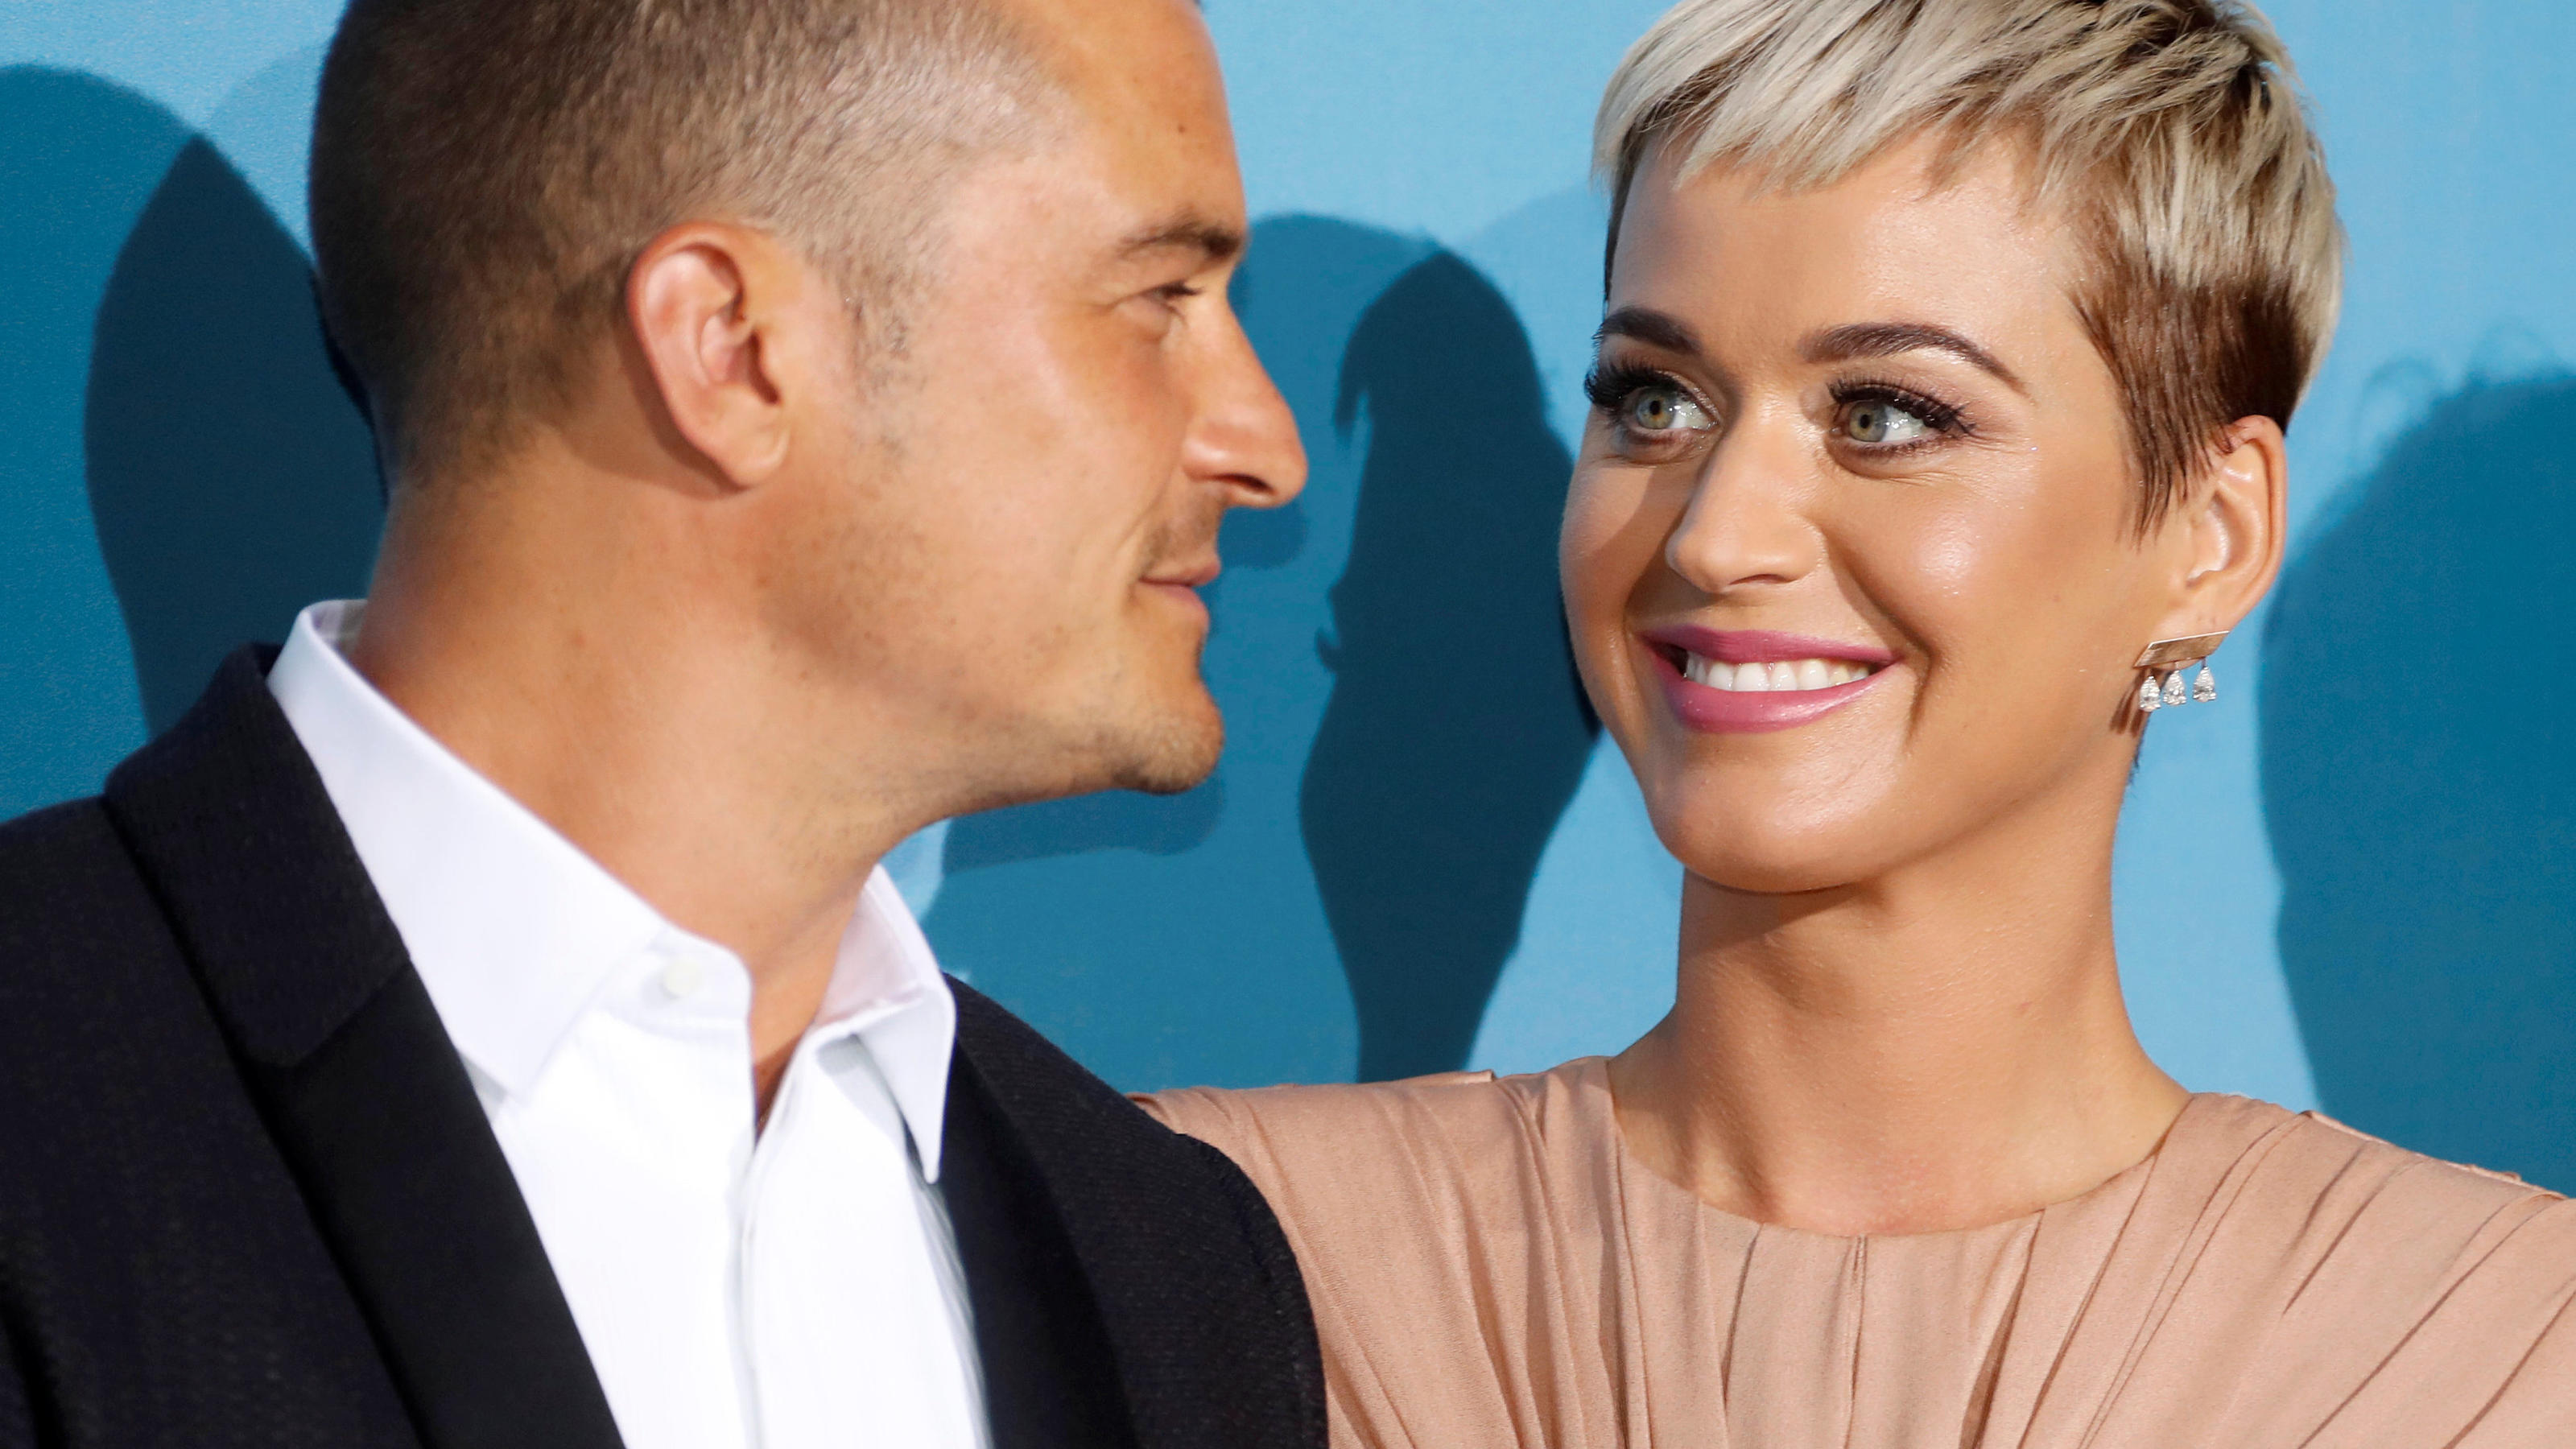 Singer Katy Perry and actor Orlando Bloom smile upon their arrival for the Monte-Carlo Gala for the Global Ocean in Monaco, September 26, 2018. REUTERS/Eric Gaillard